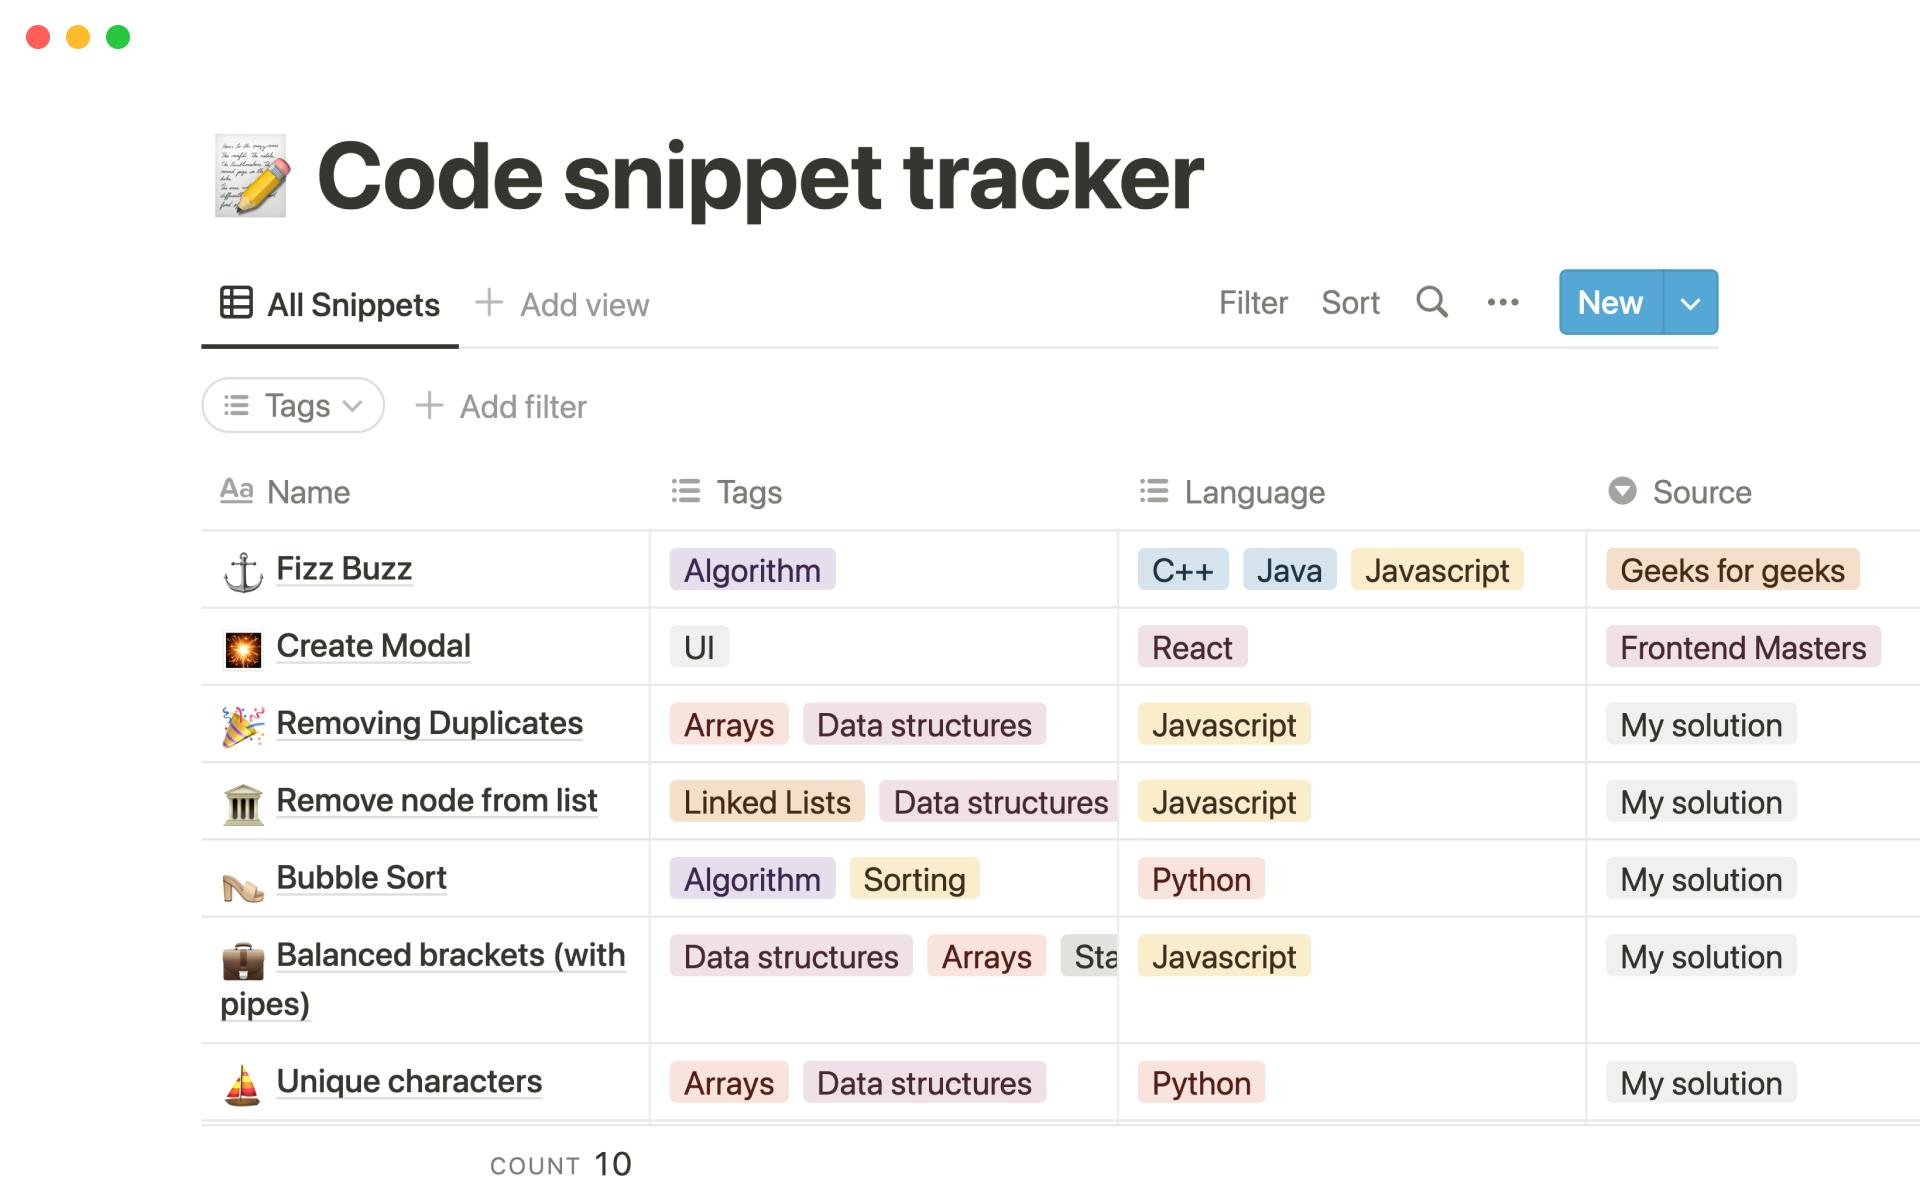 Code snippet tracker